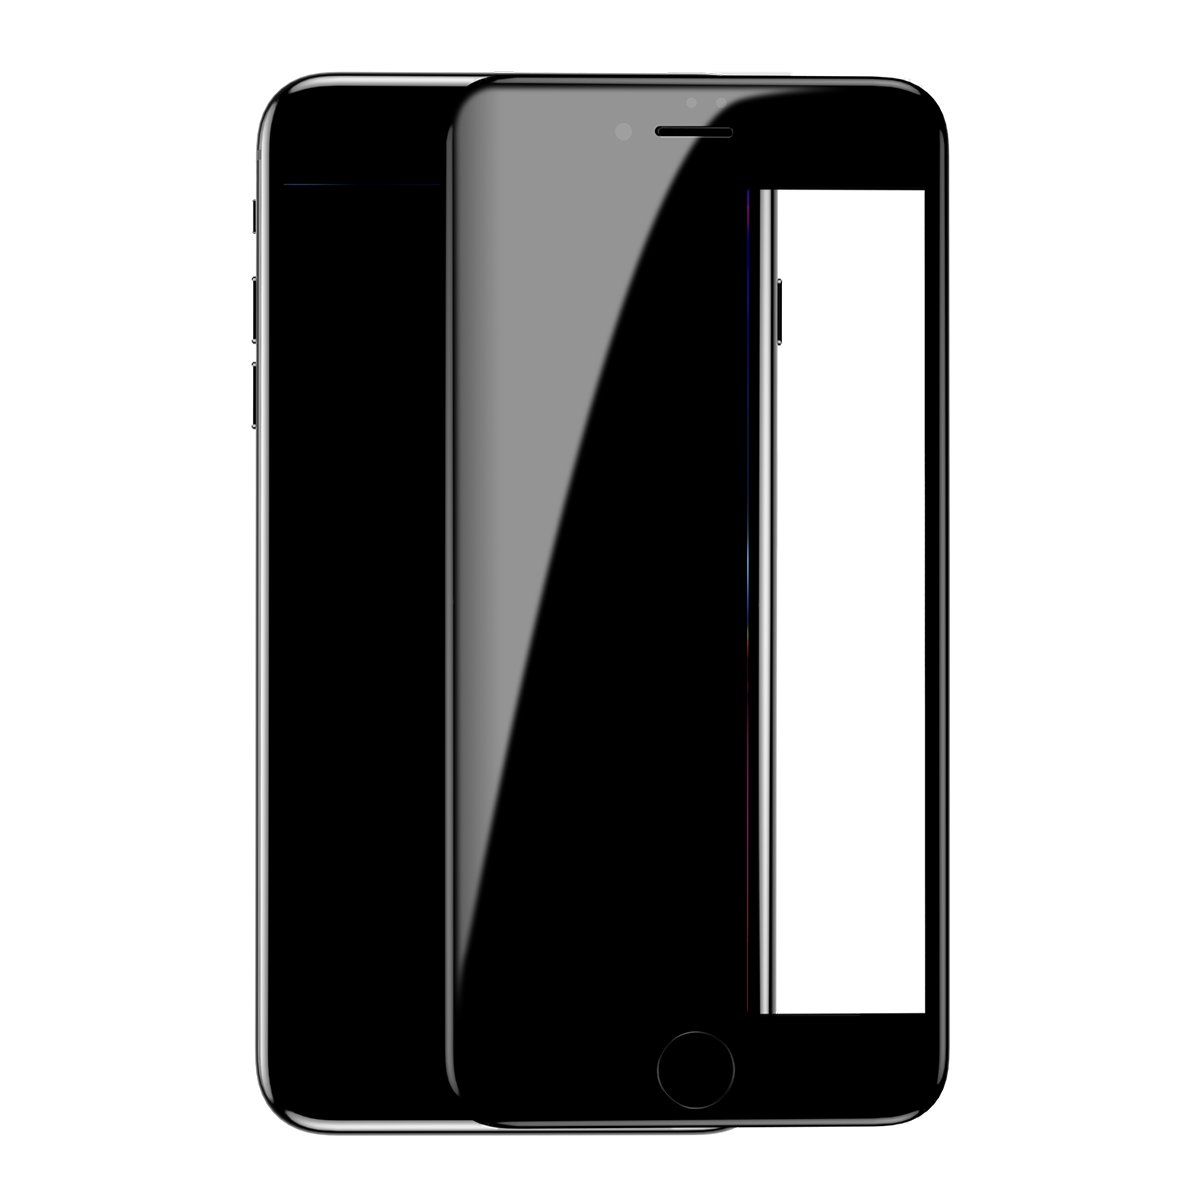 Baseus 5D Curved Edge 0.3mm Tempered Glass Film for iPhone 7Plus/8Plus